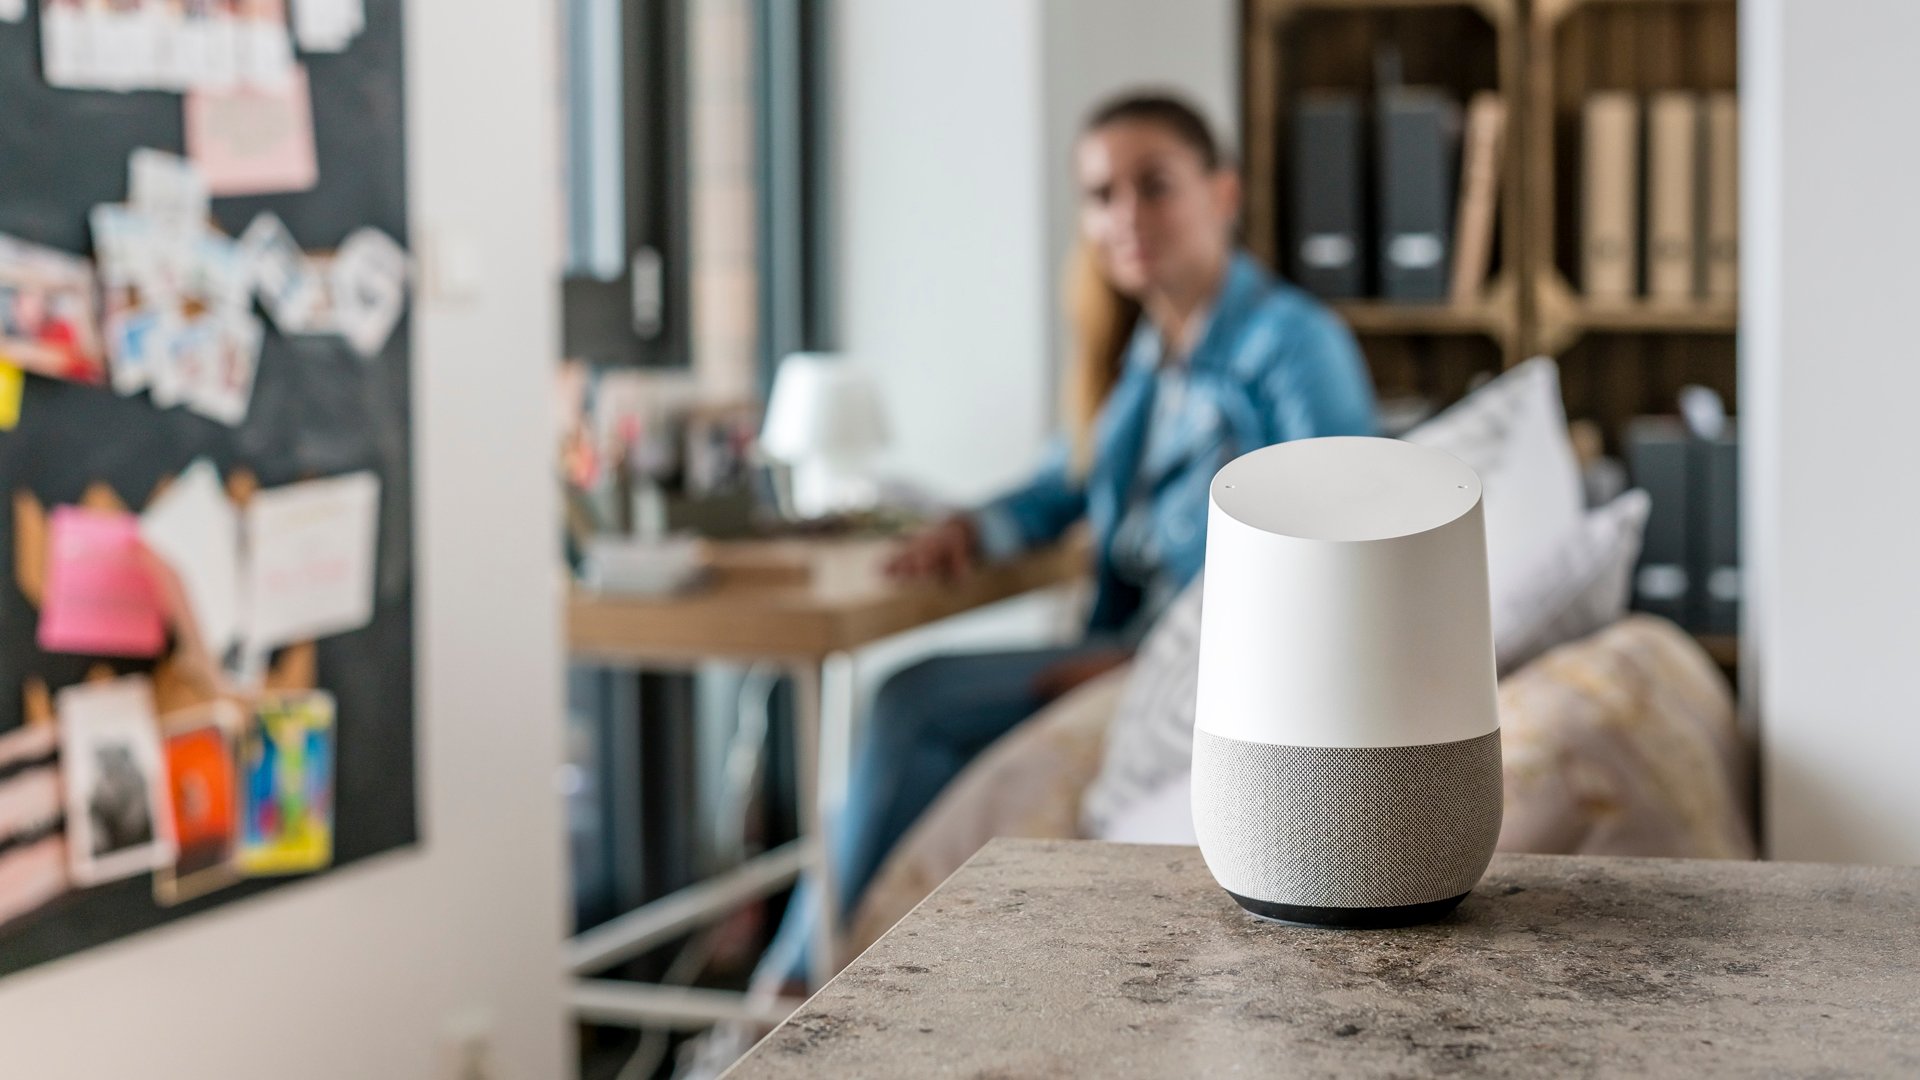 How To Change Google Home Voice